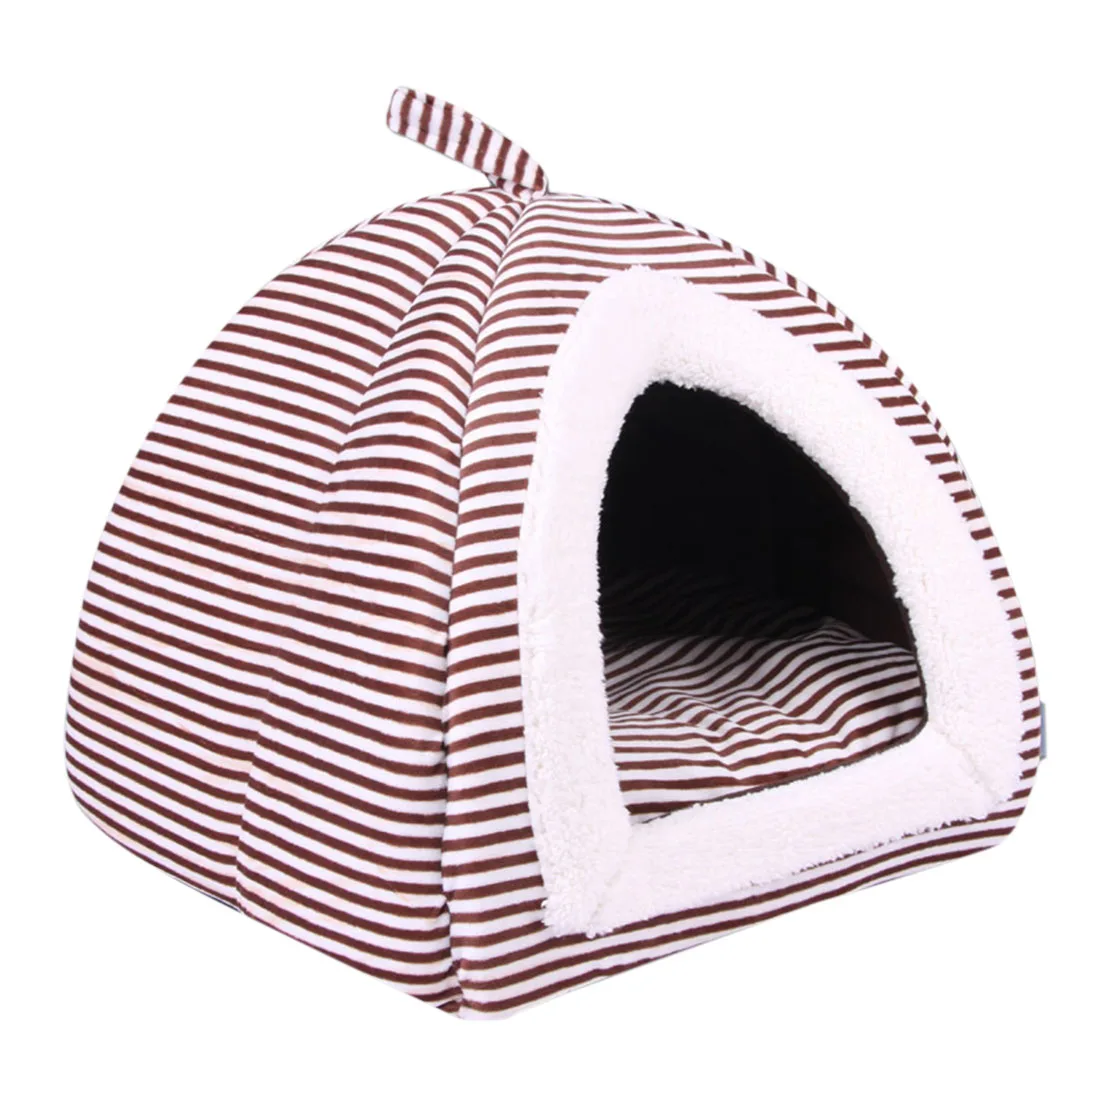 Hot Sale New Styles Dog Tent Dog House Pet Tent Dog Beds for Small Dogs Home Warm Winter Cama Perro Pet Products Nest